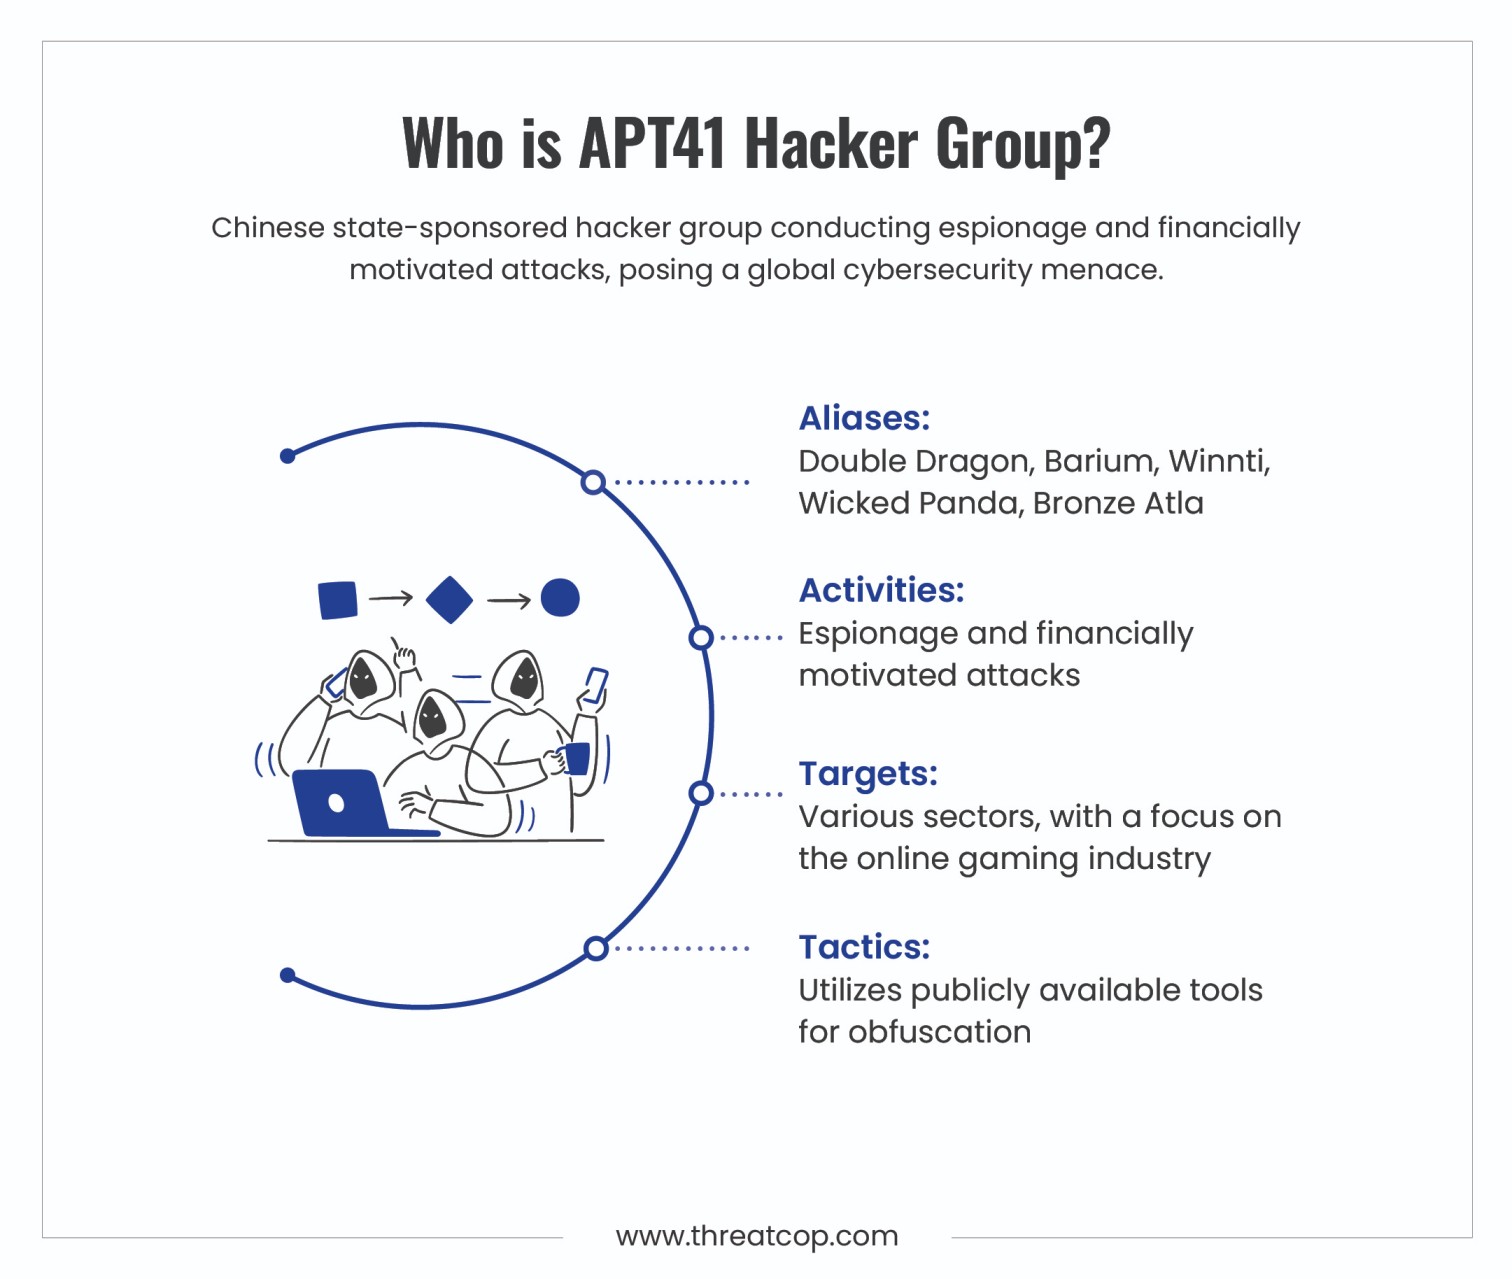 Who is APT41 Hacker Group